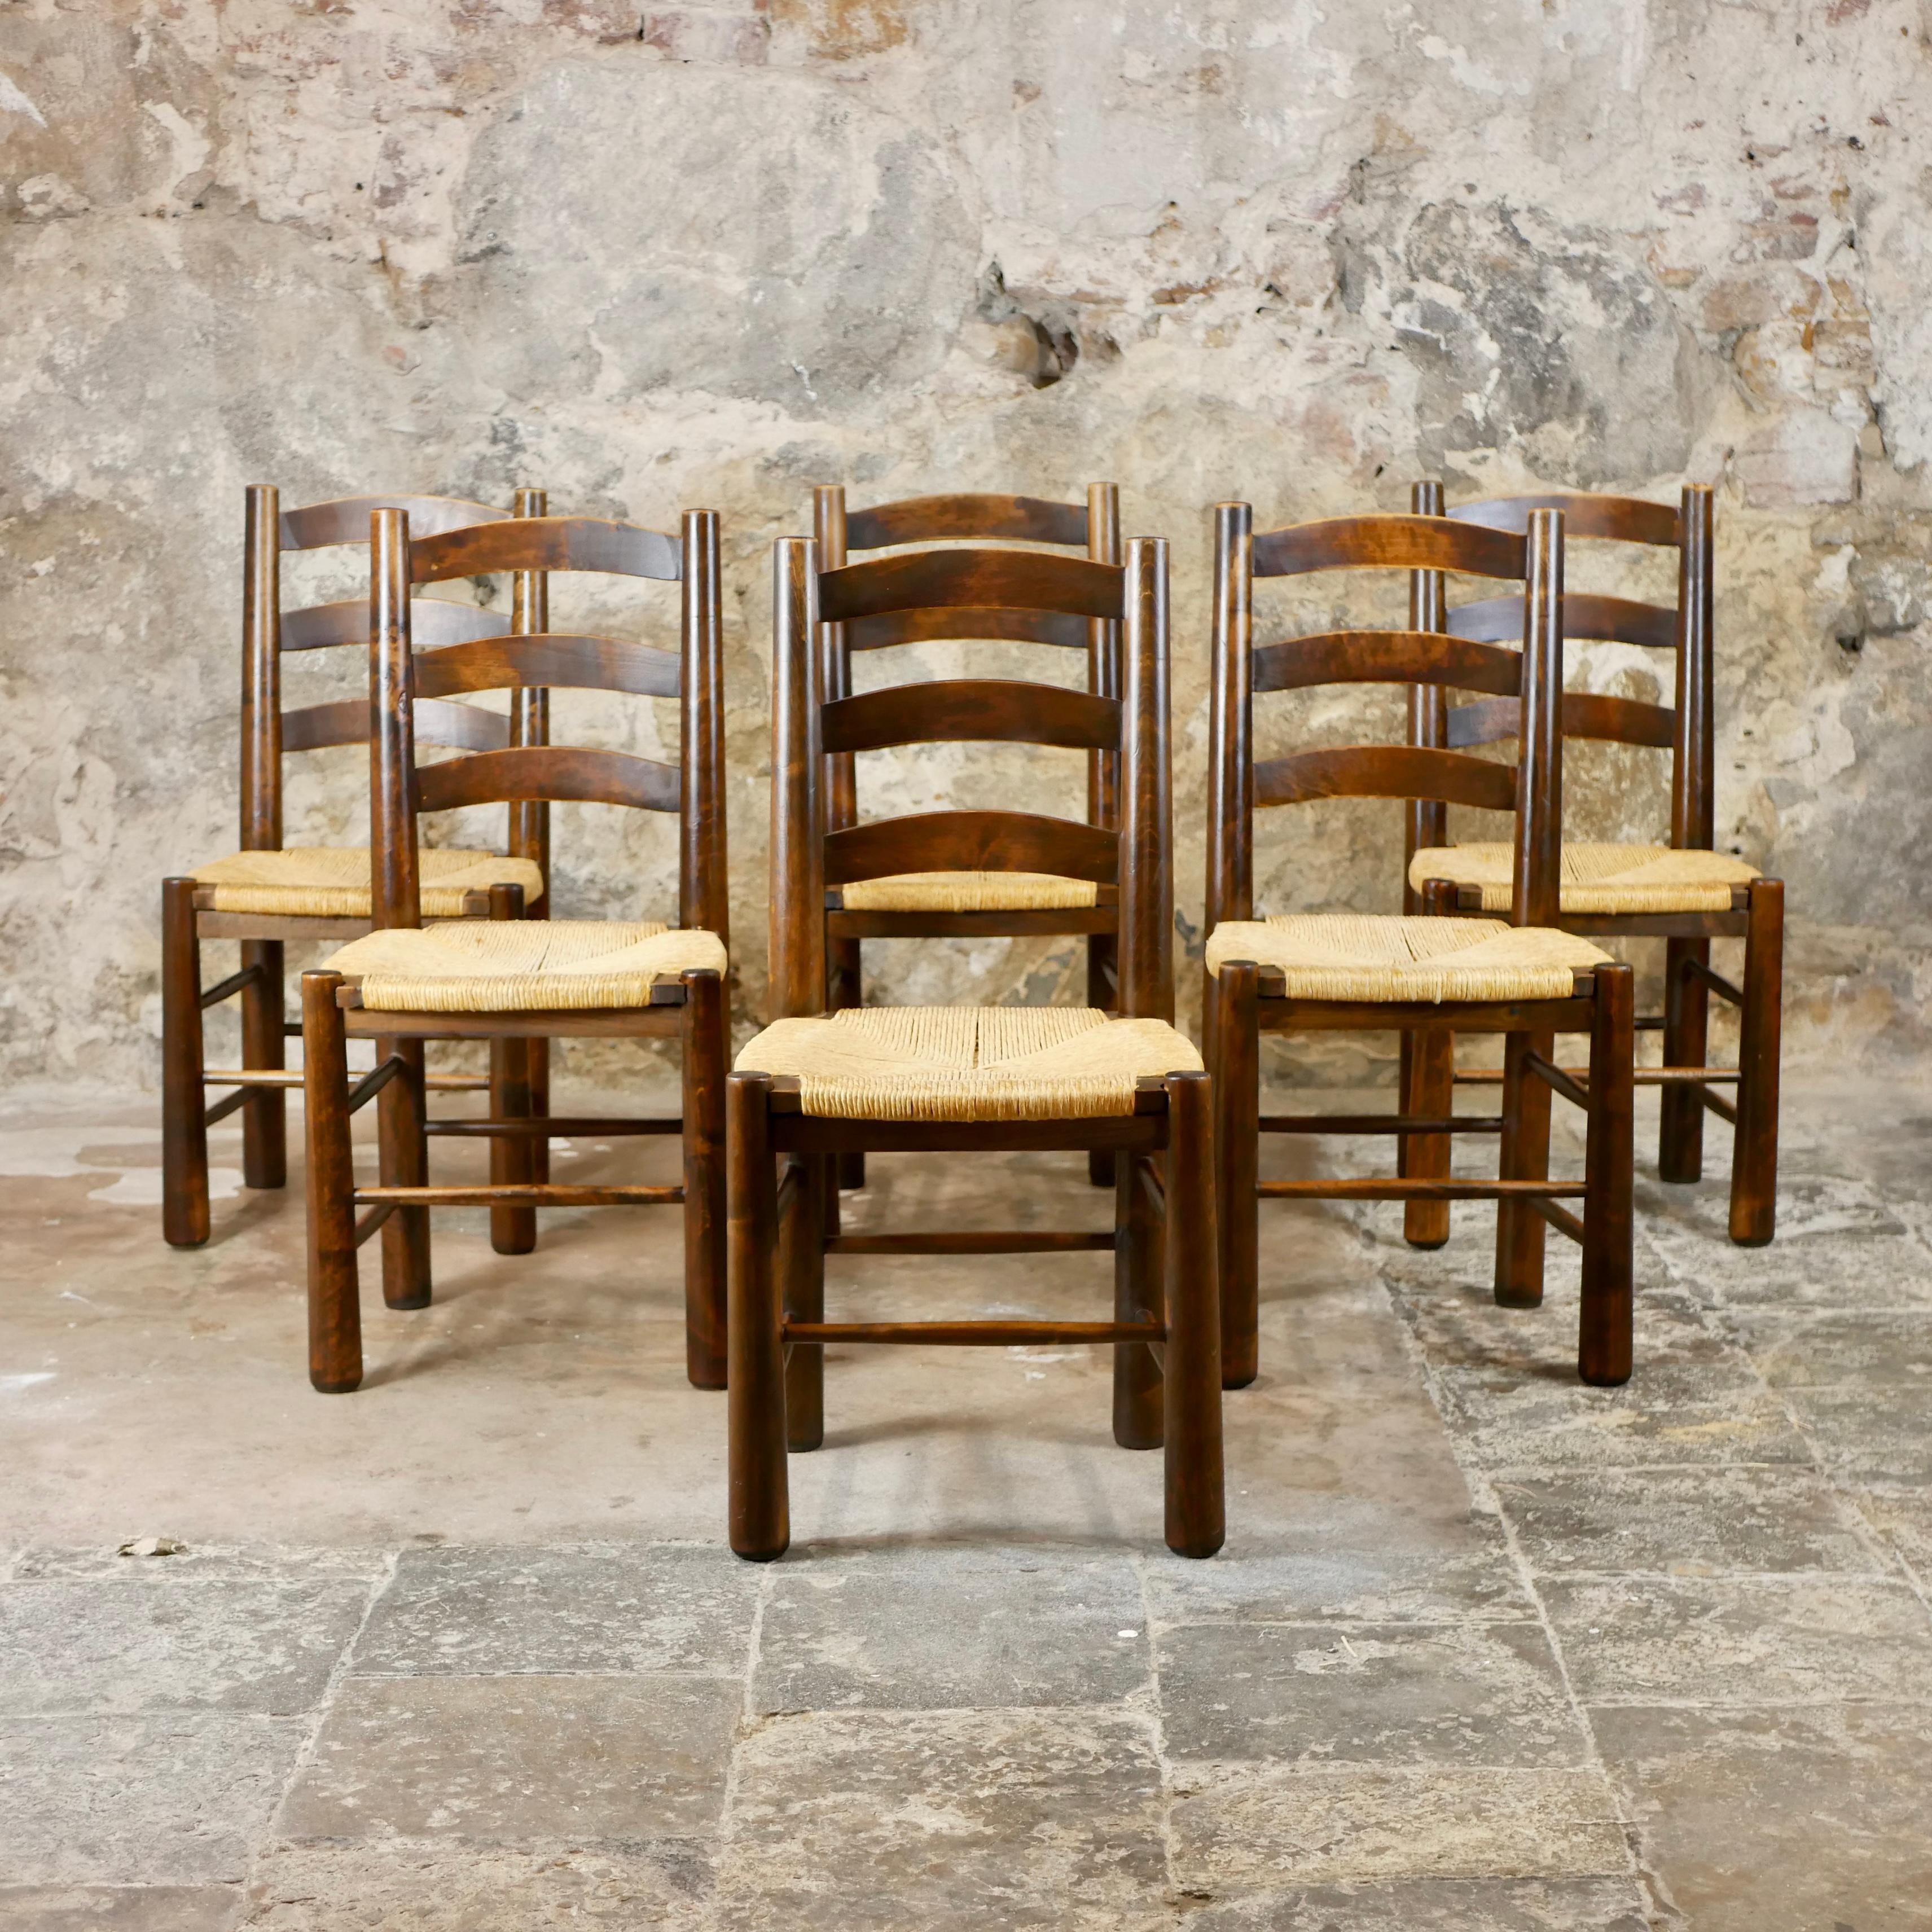 French Provincial Set of 6 Georges Robert wood and straw chairs, made in France, 1950s For Sale